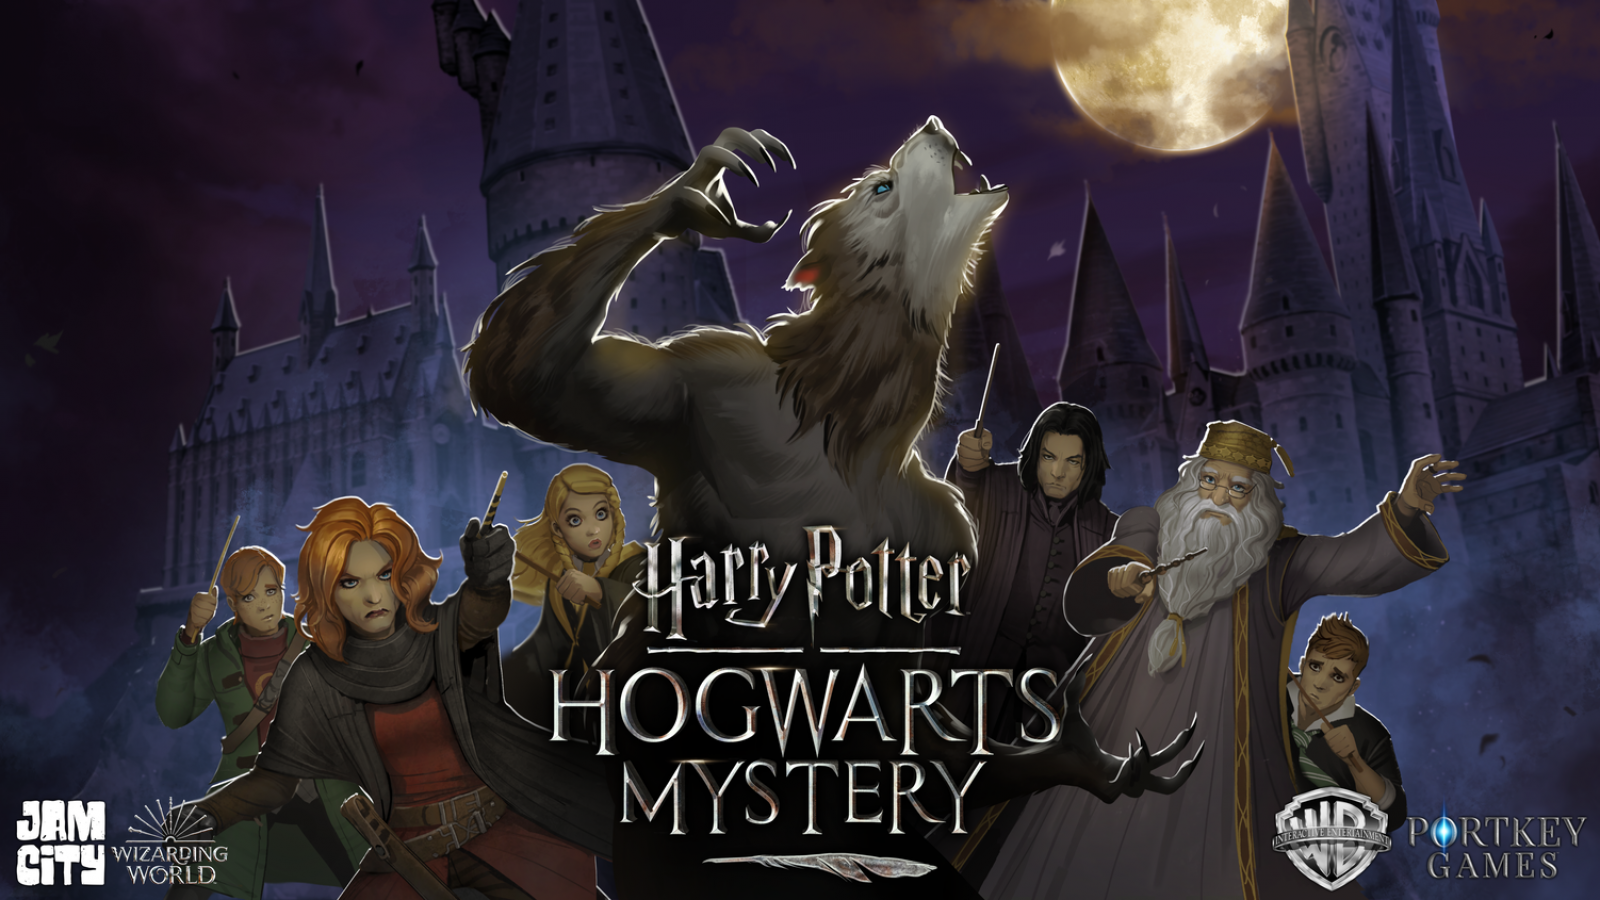 Harry Potter: Hogwarts Mystery' Halloween Event Will Take a Sinister Turn, Say Devs